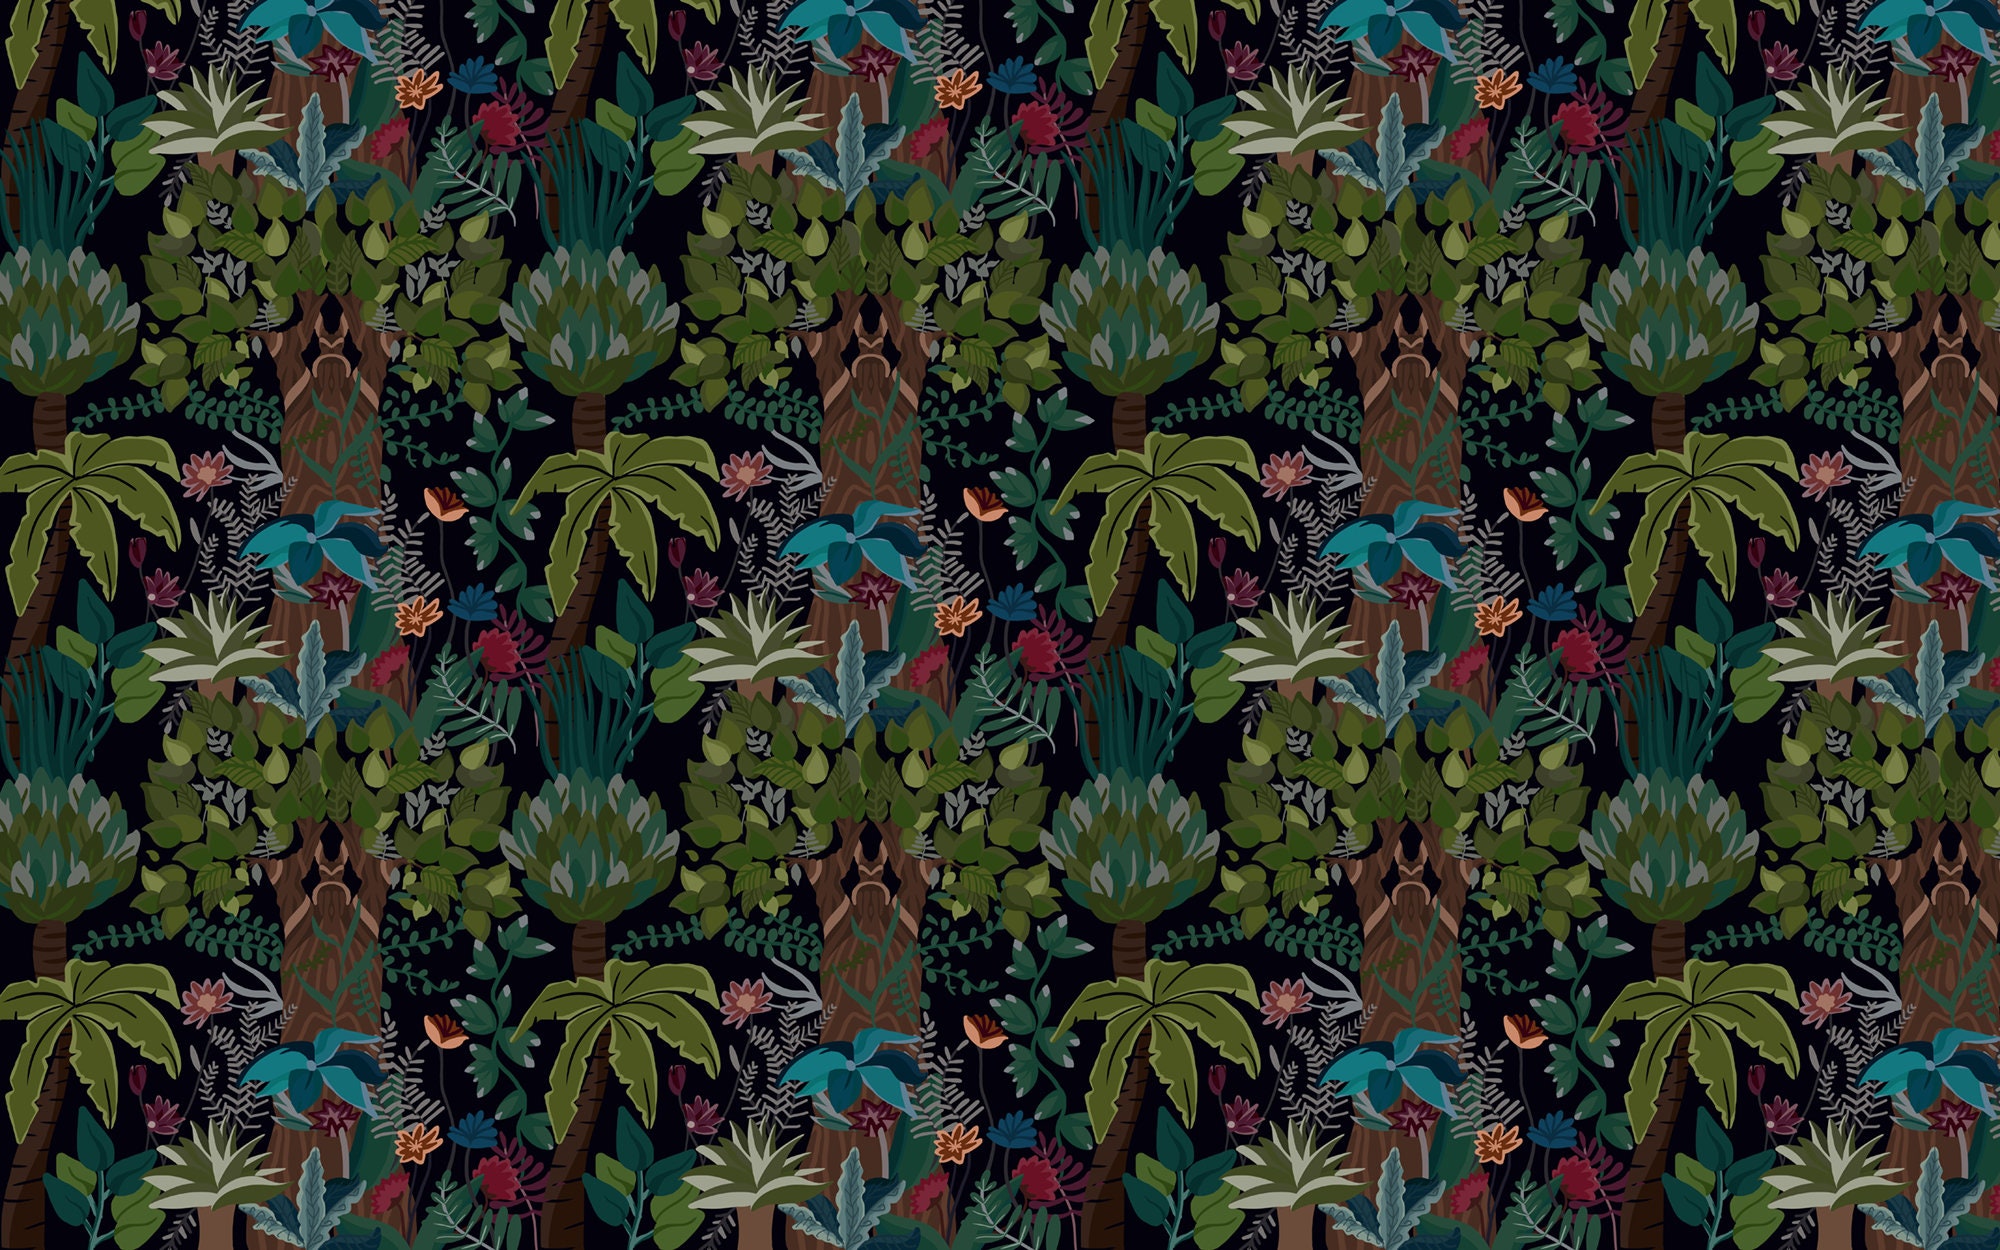 Vectorial Tropical Forest Wallpaper Stylish Wall Poster Trendy | Etsy